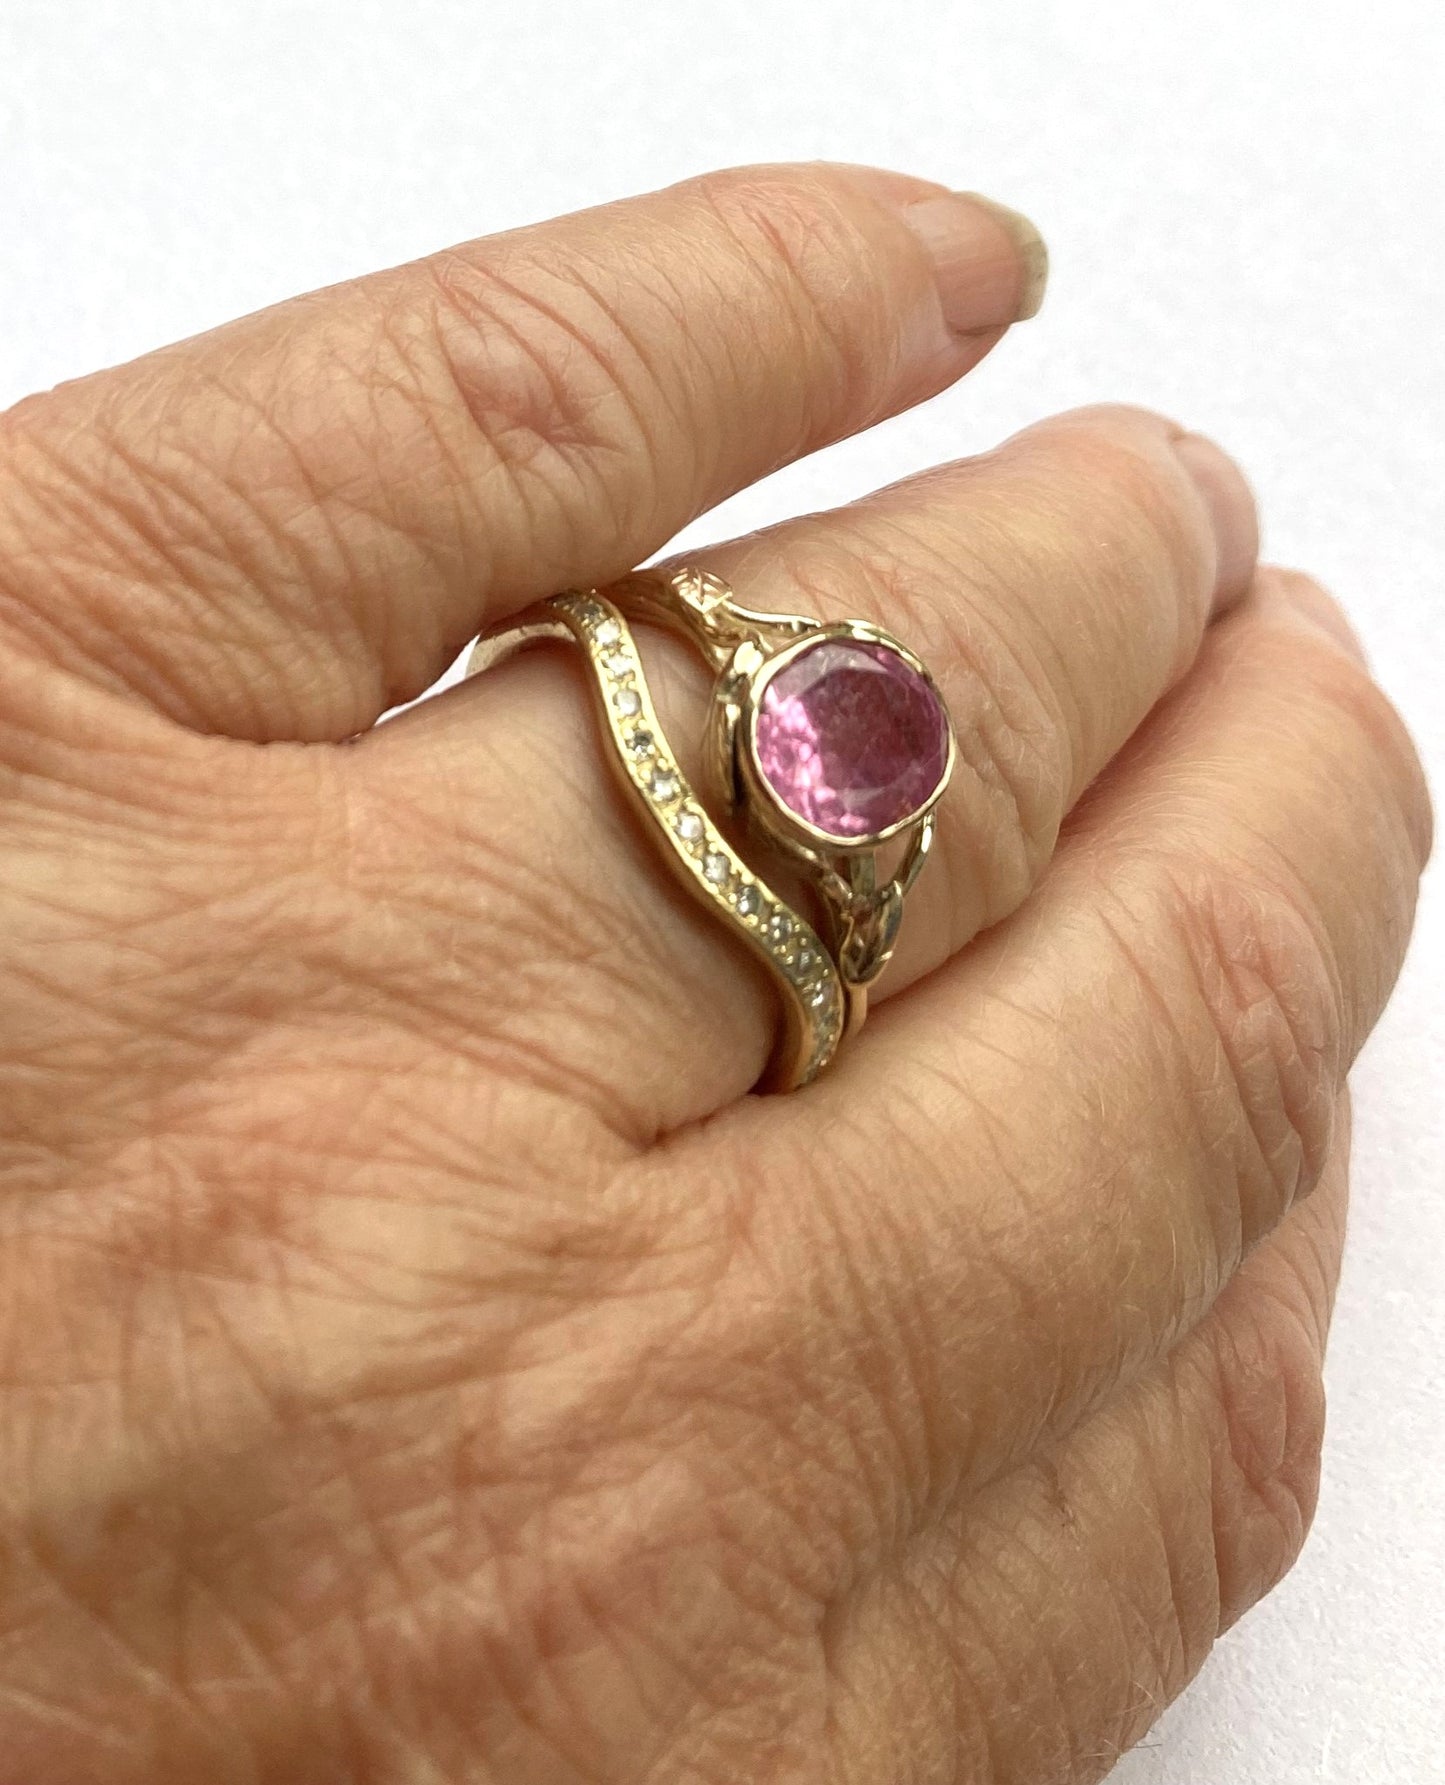 gold cocktail ring with big oval pink stone and diamond set wedding ring, on hand